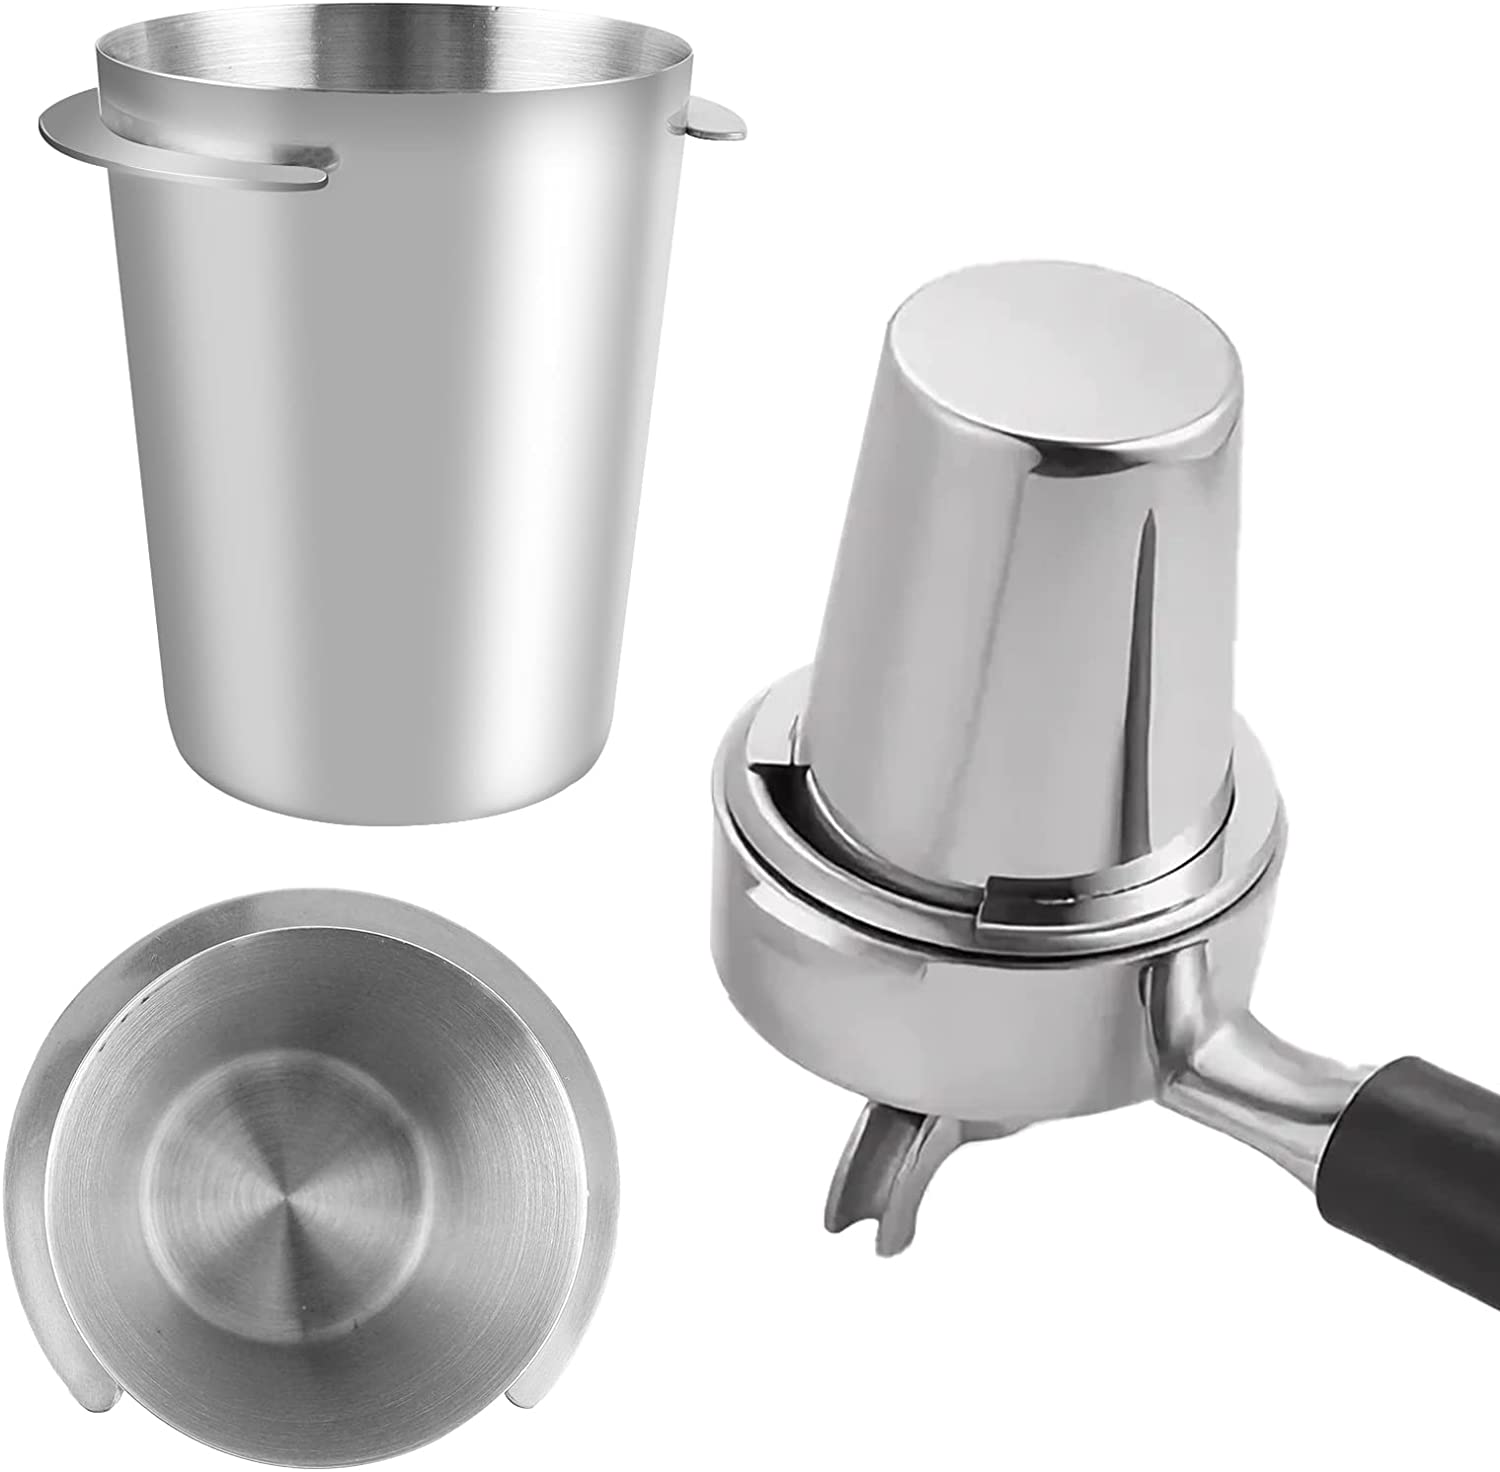 Coffee Dosing Cup 58 mm, Coffee Dosing Funnel, Stainless Steel Coffee Portatilter Dosing Funnel Espresso of Ground Coffee Below Mill and Filter Holder, Dosing Cup for Espresso Machine (Silver)